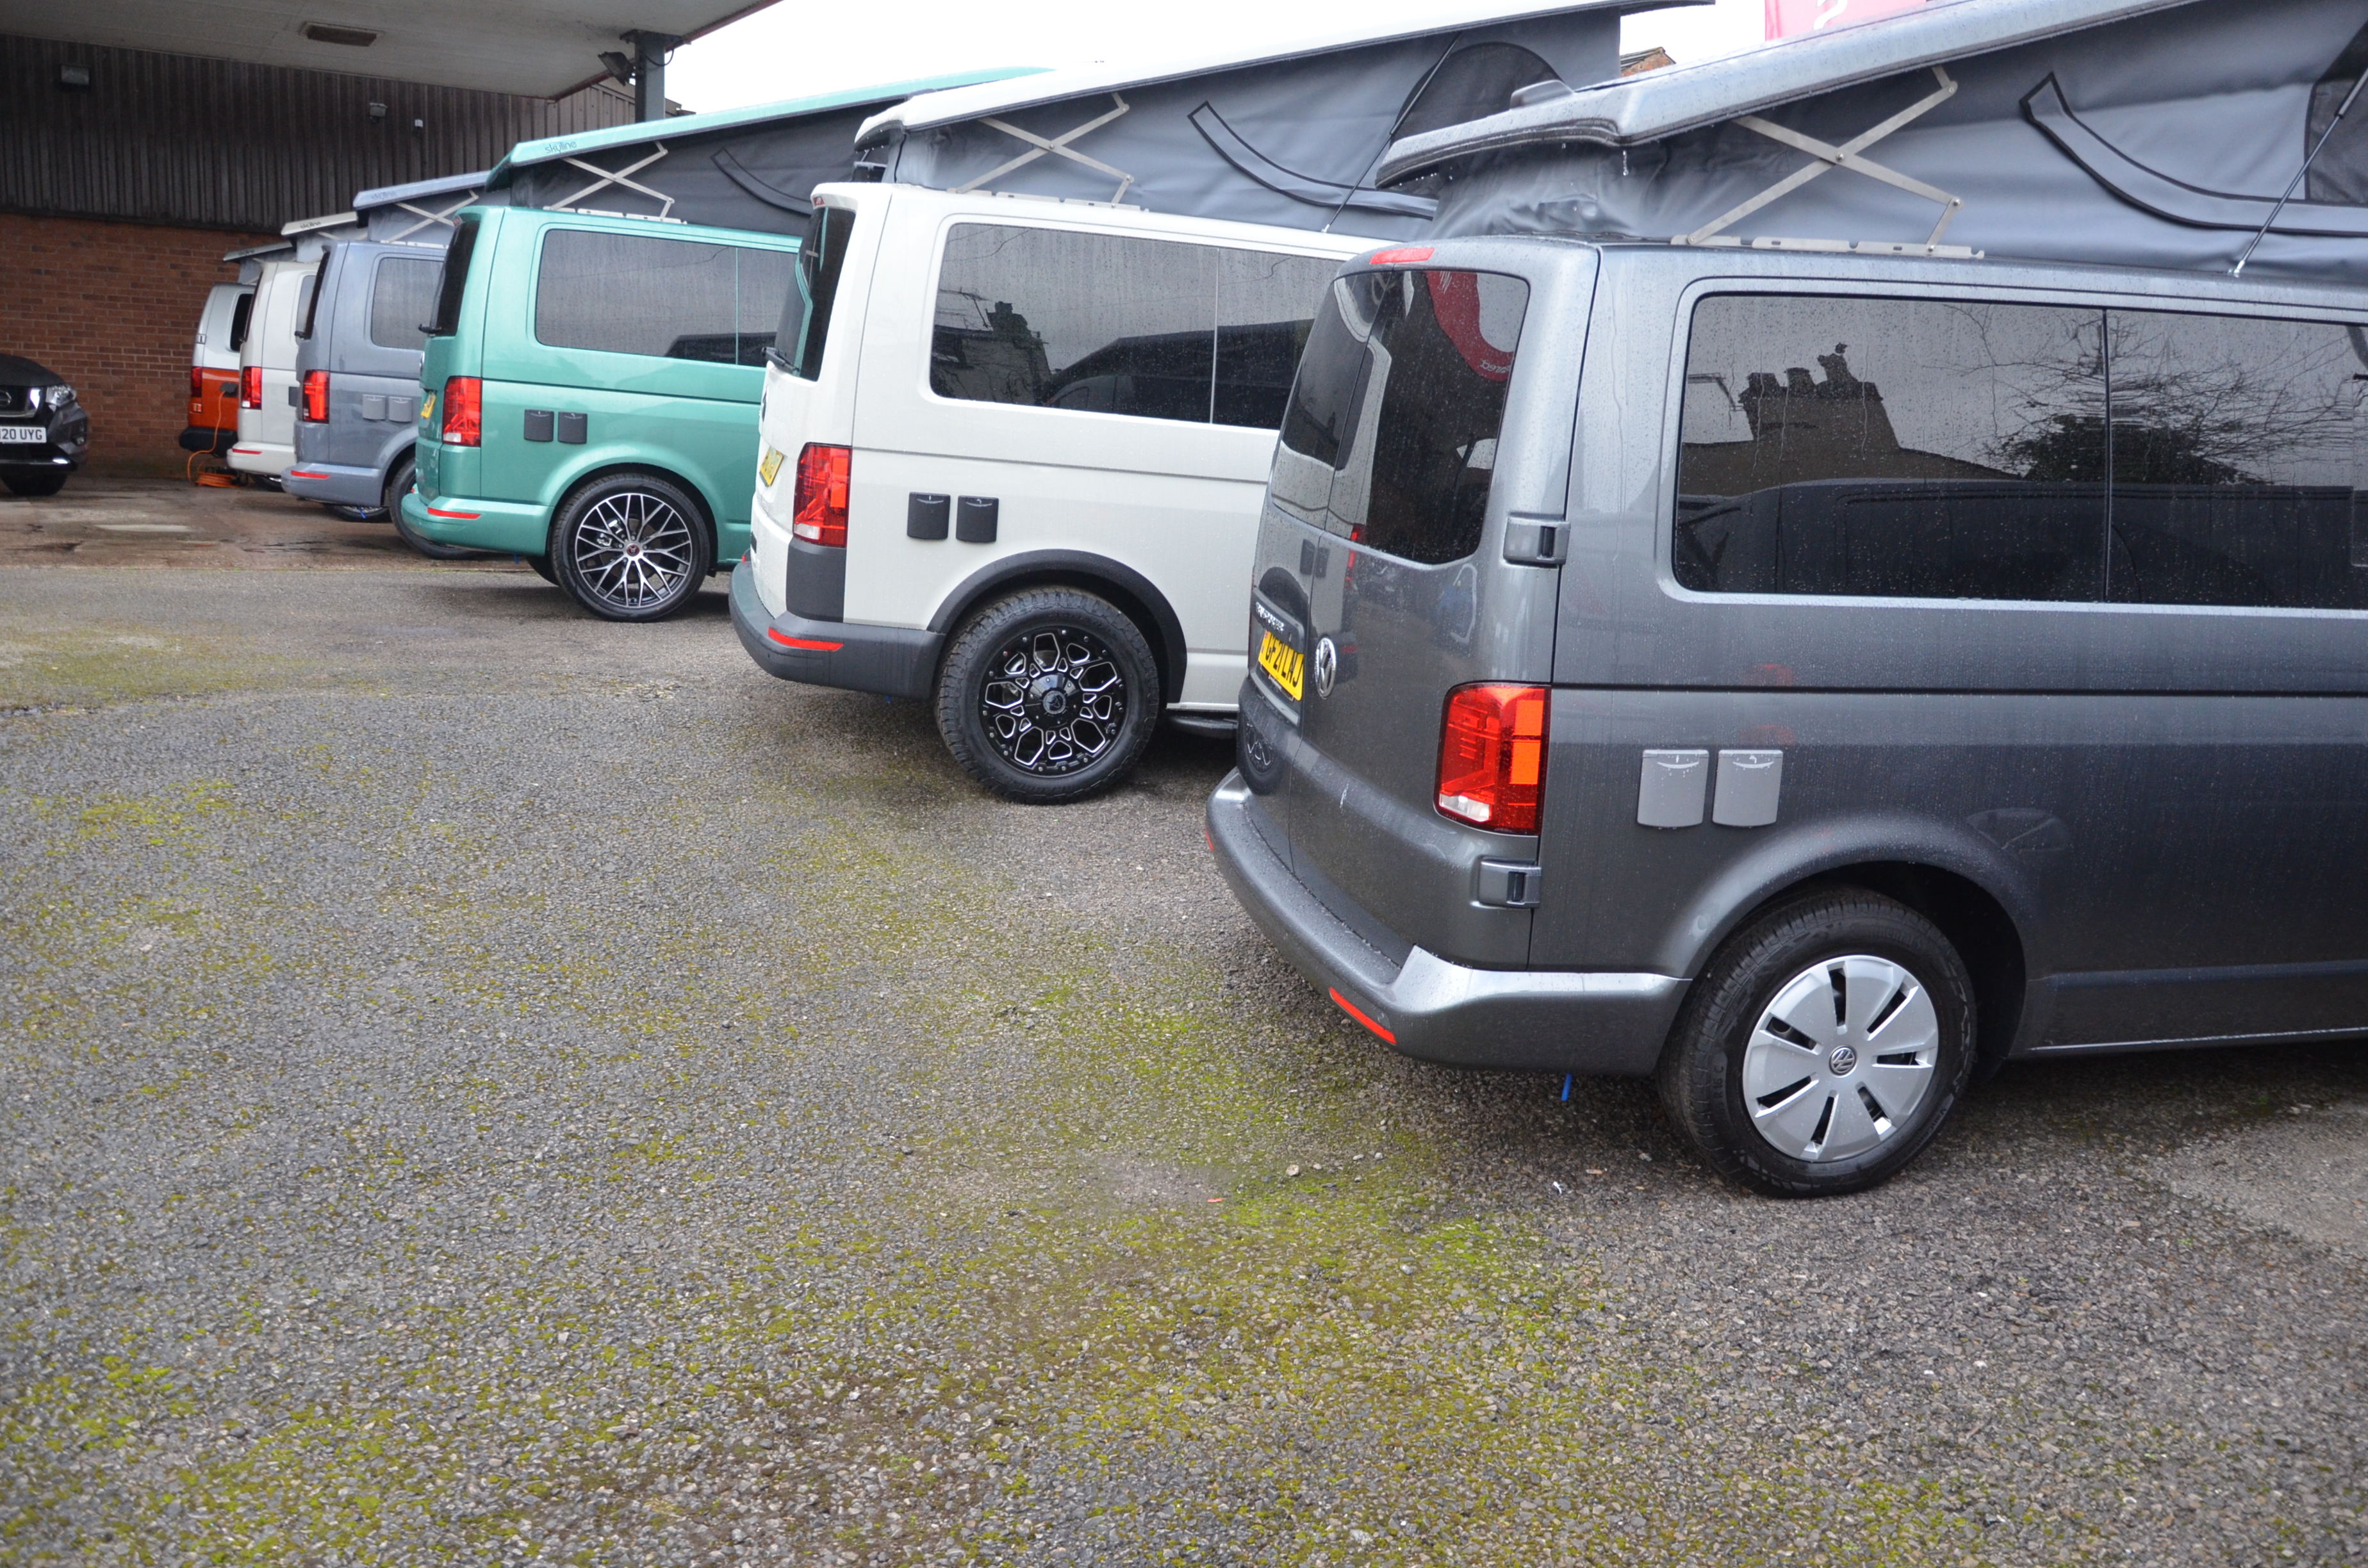 About Our VW Camper Conversions